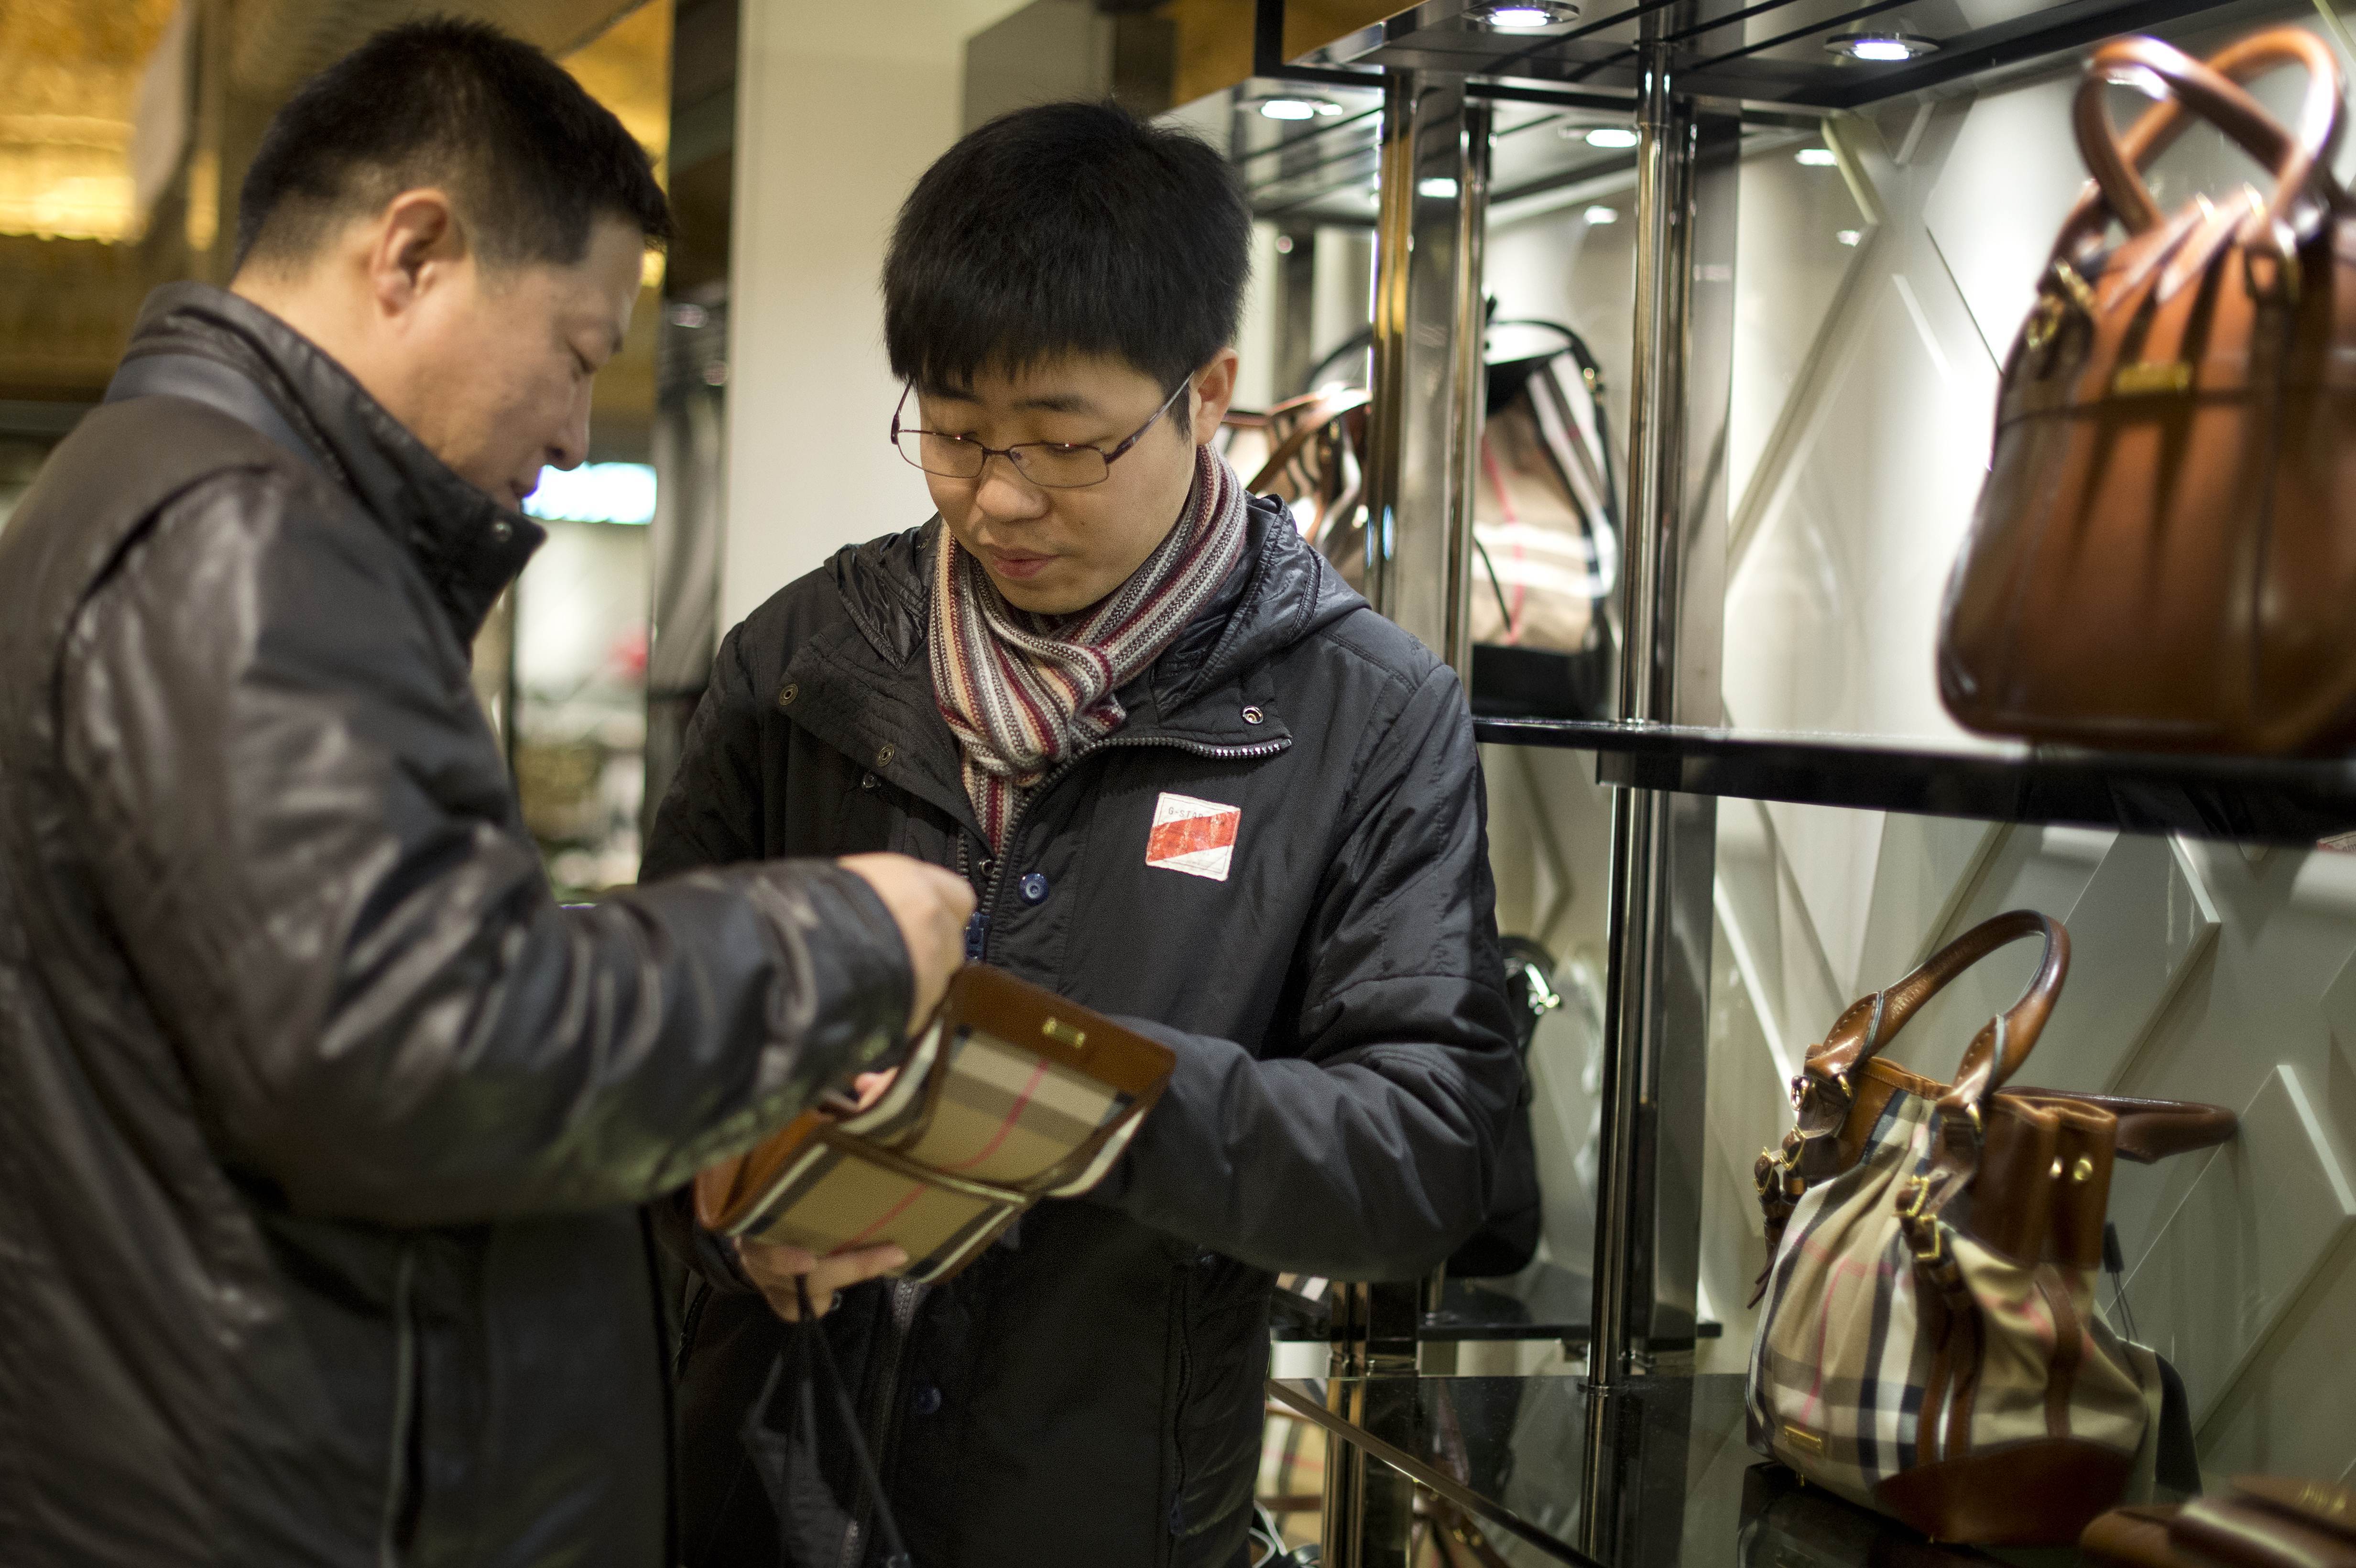 Chinese tourists shop at Harrods department store in London. Photo: AFP